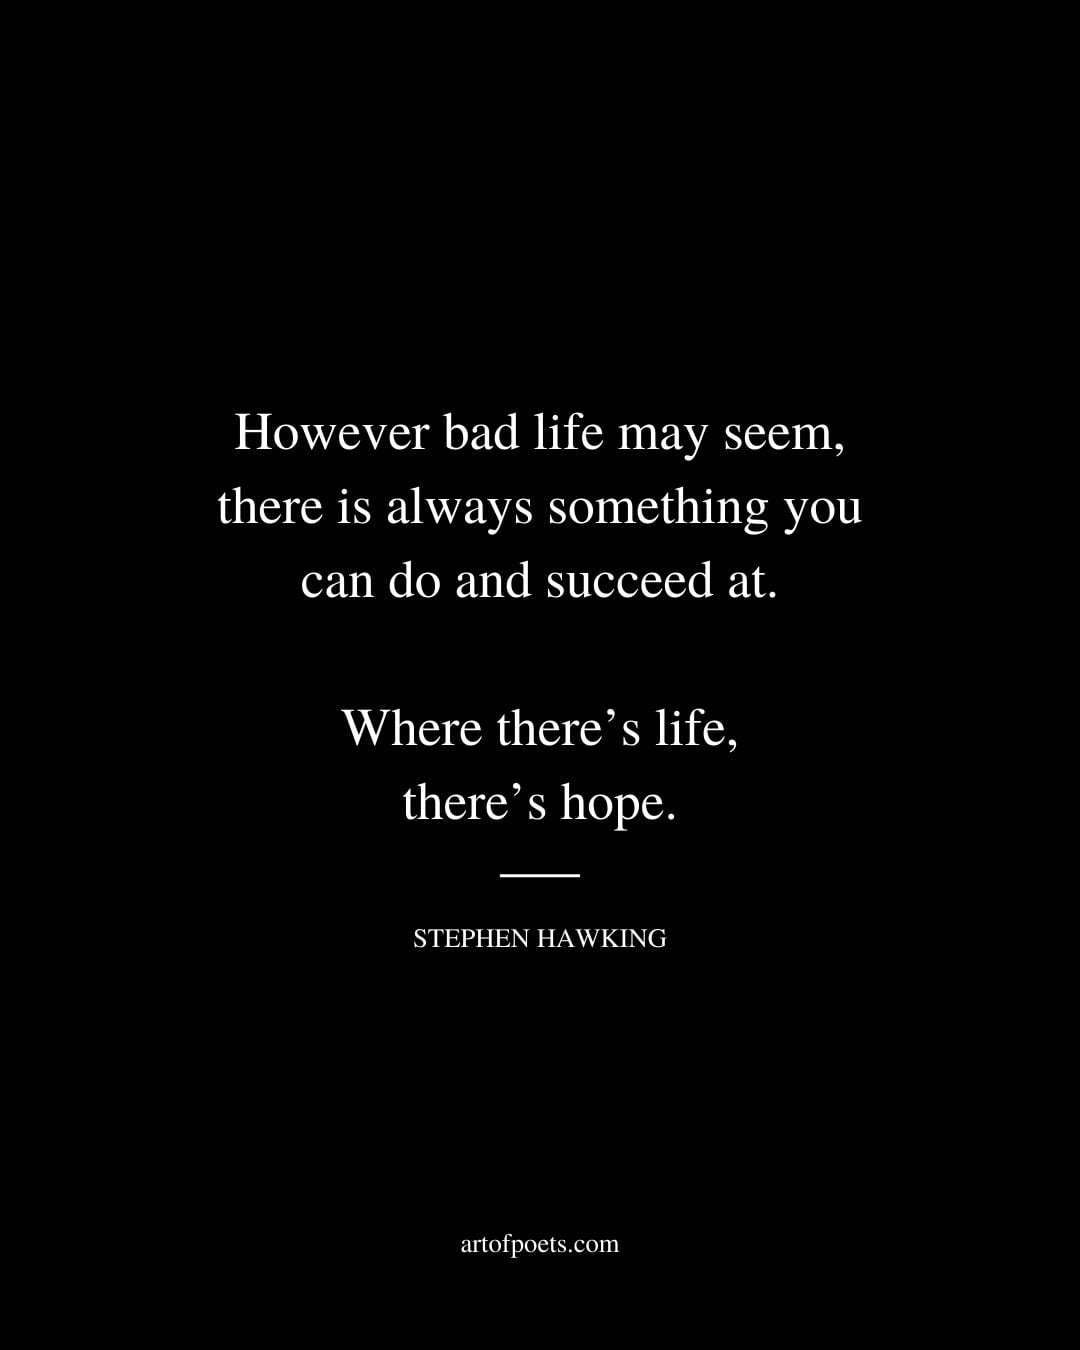 However bad life may seem there is always something you can do and succeed at. Where theres life theres hope. Stephen Hawking